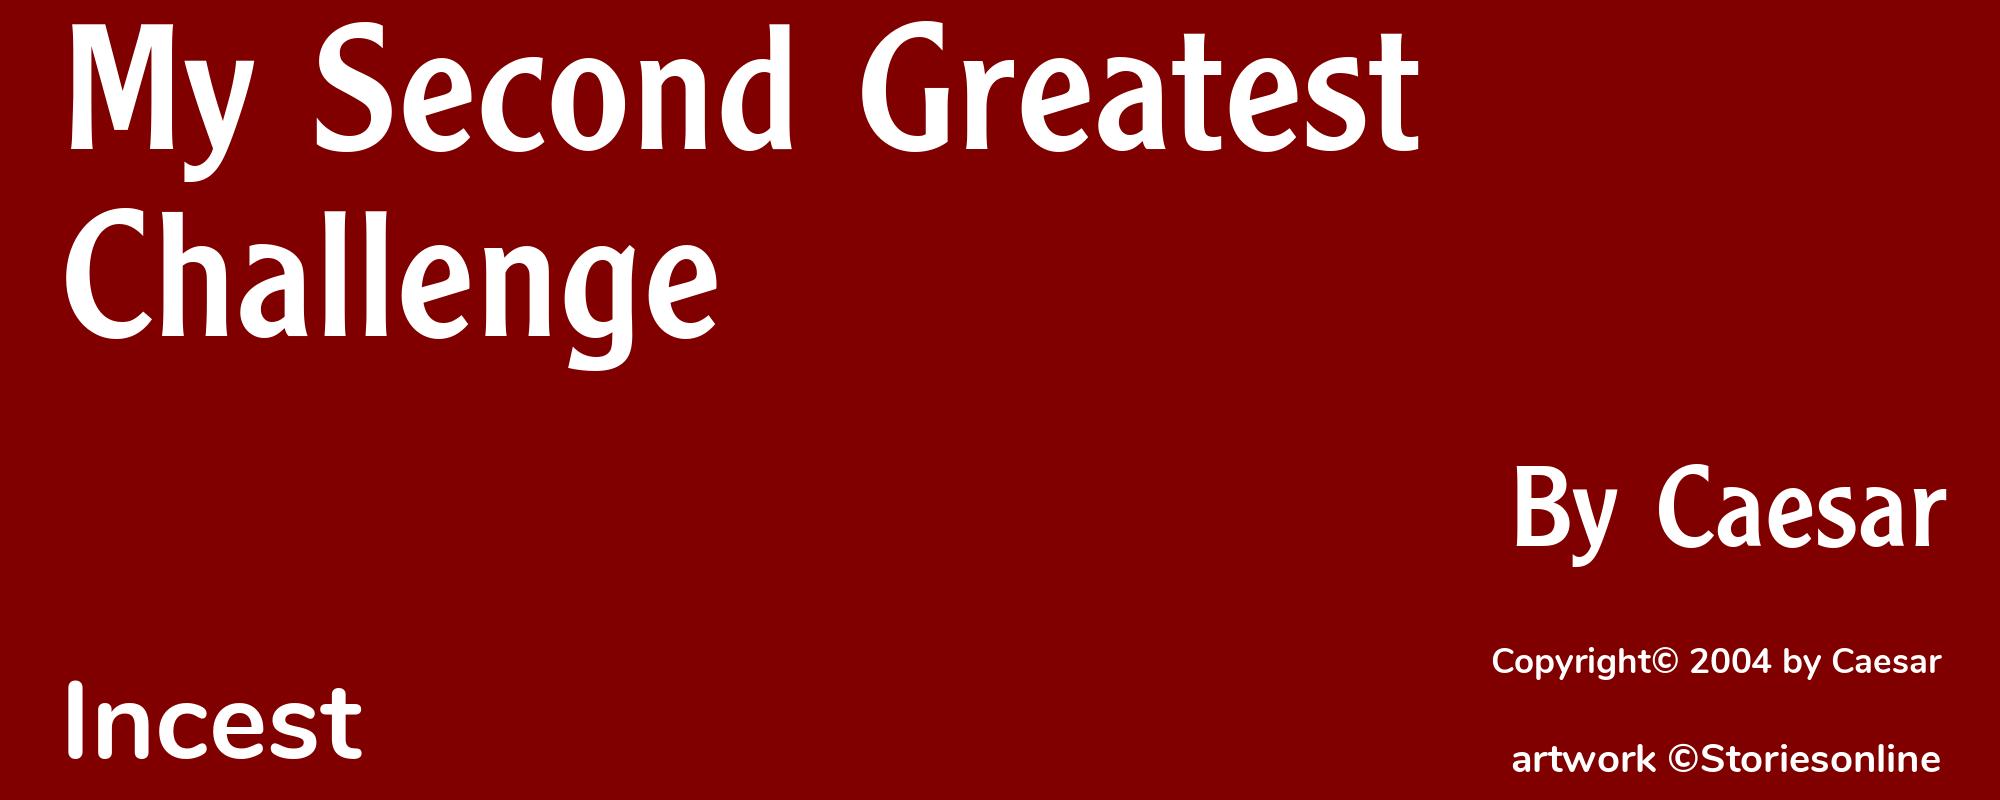 My Second Greatest Challenge - Cover